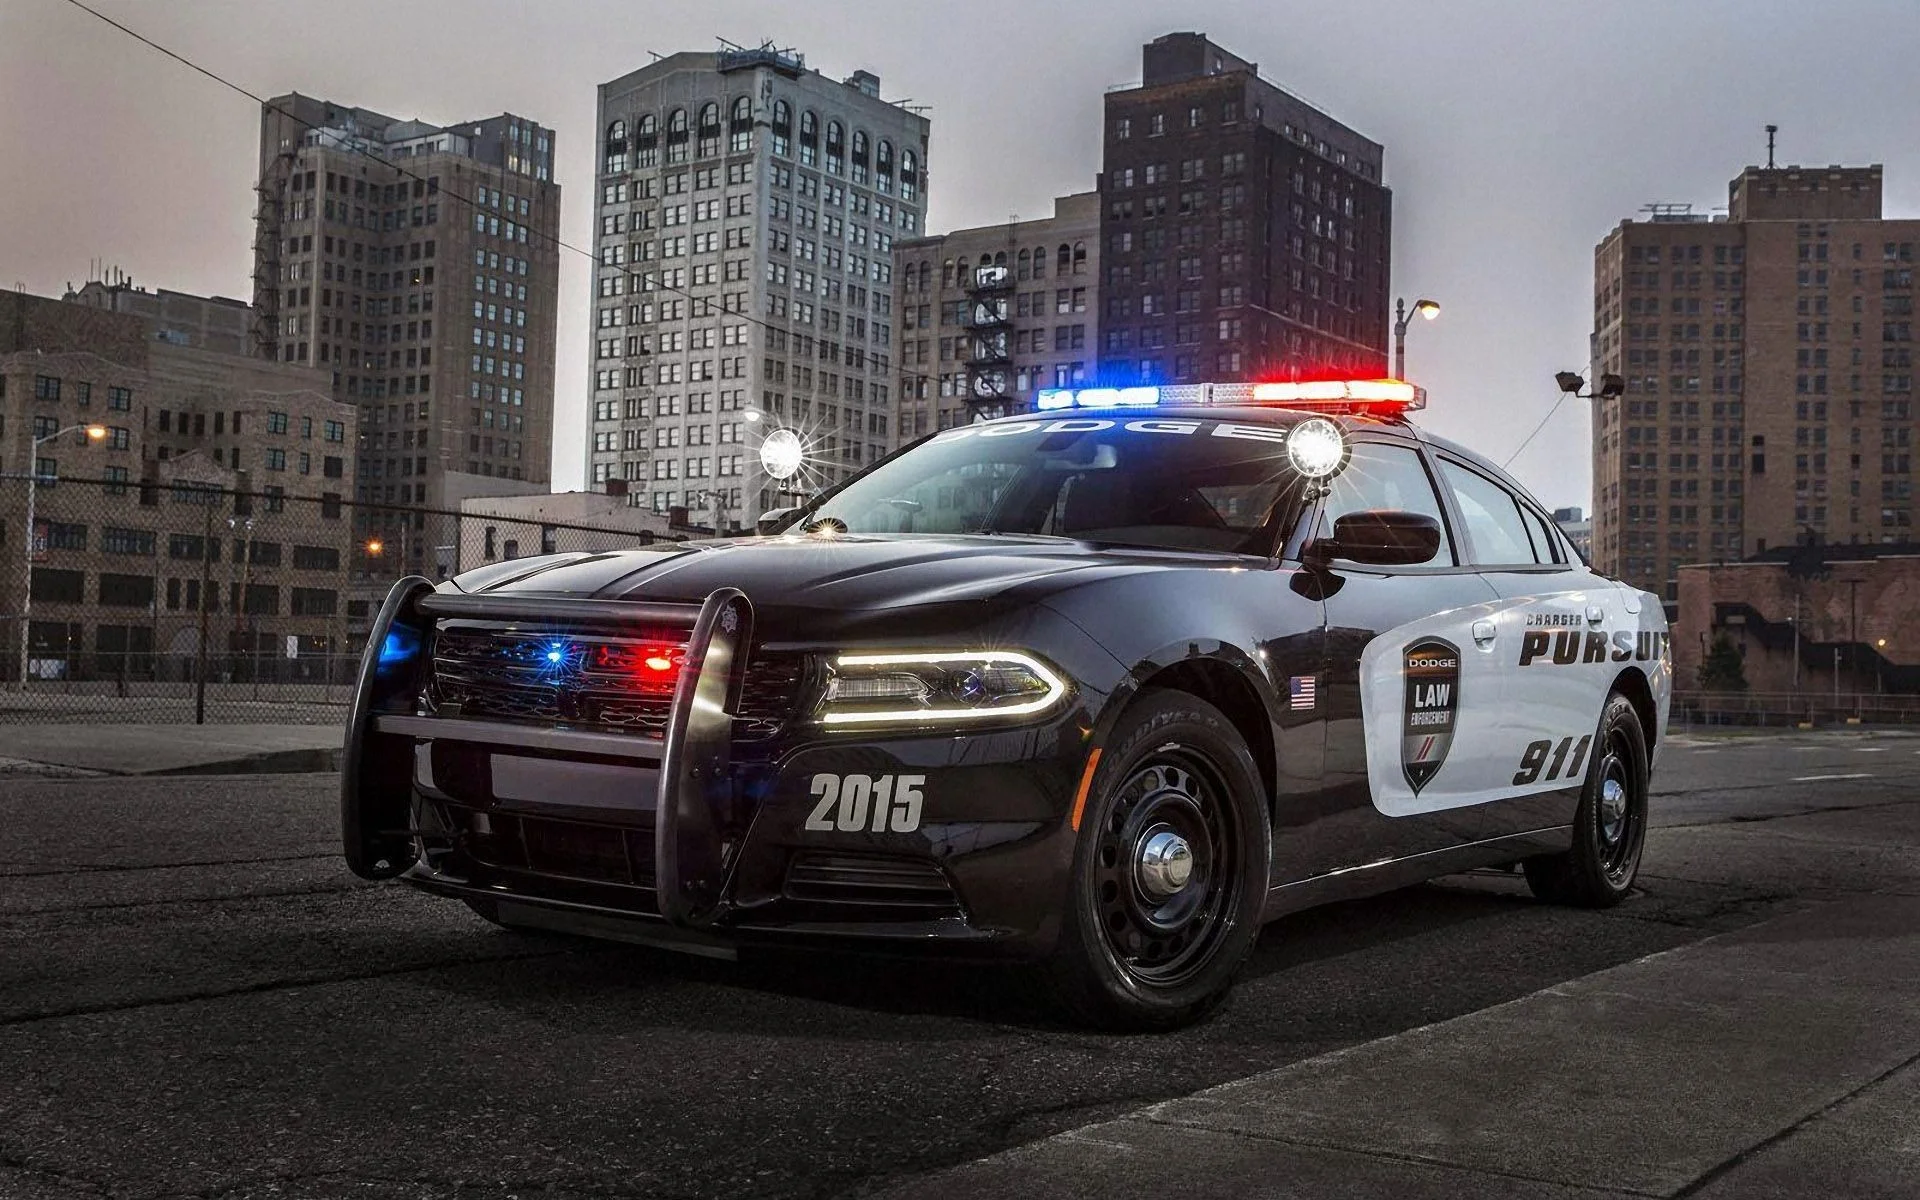 Police Car Images